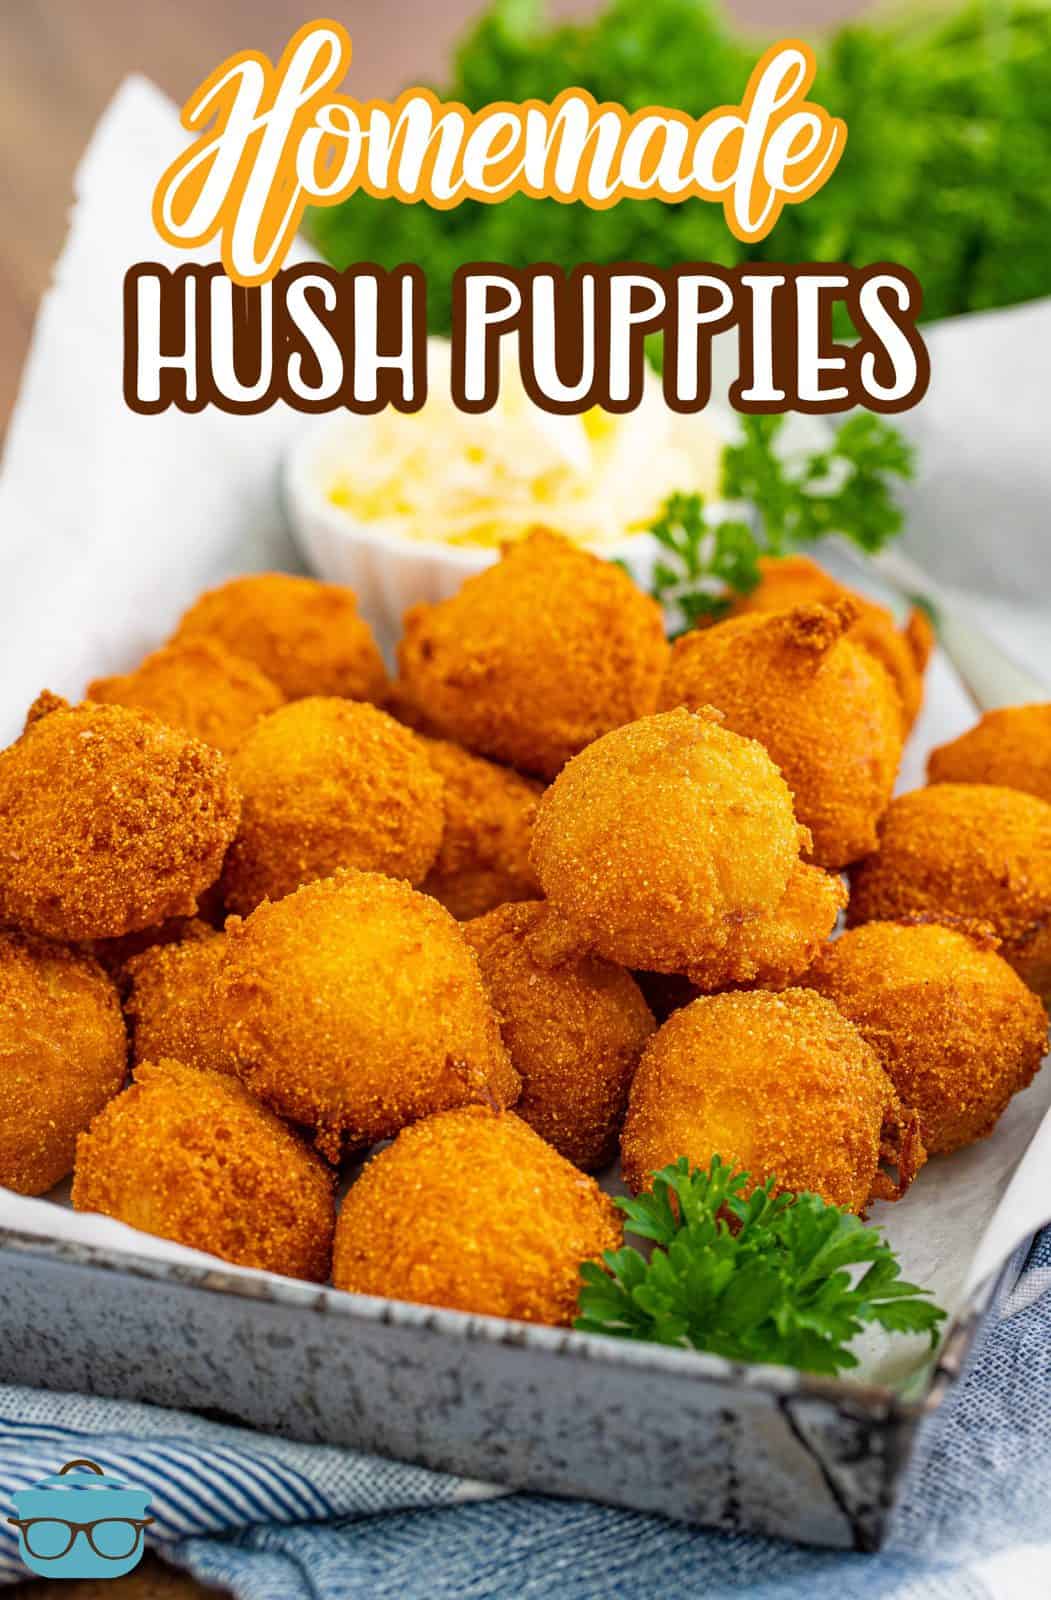 Pinterest image of Homemade Hush Puppies on metal tray with parsley garnish.